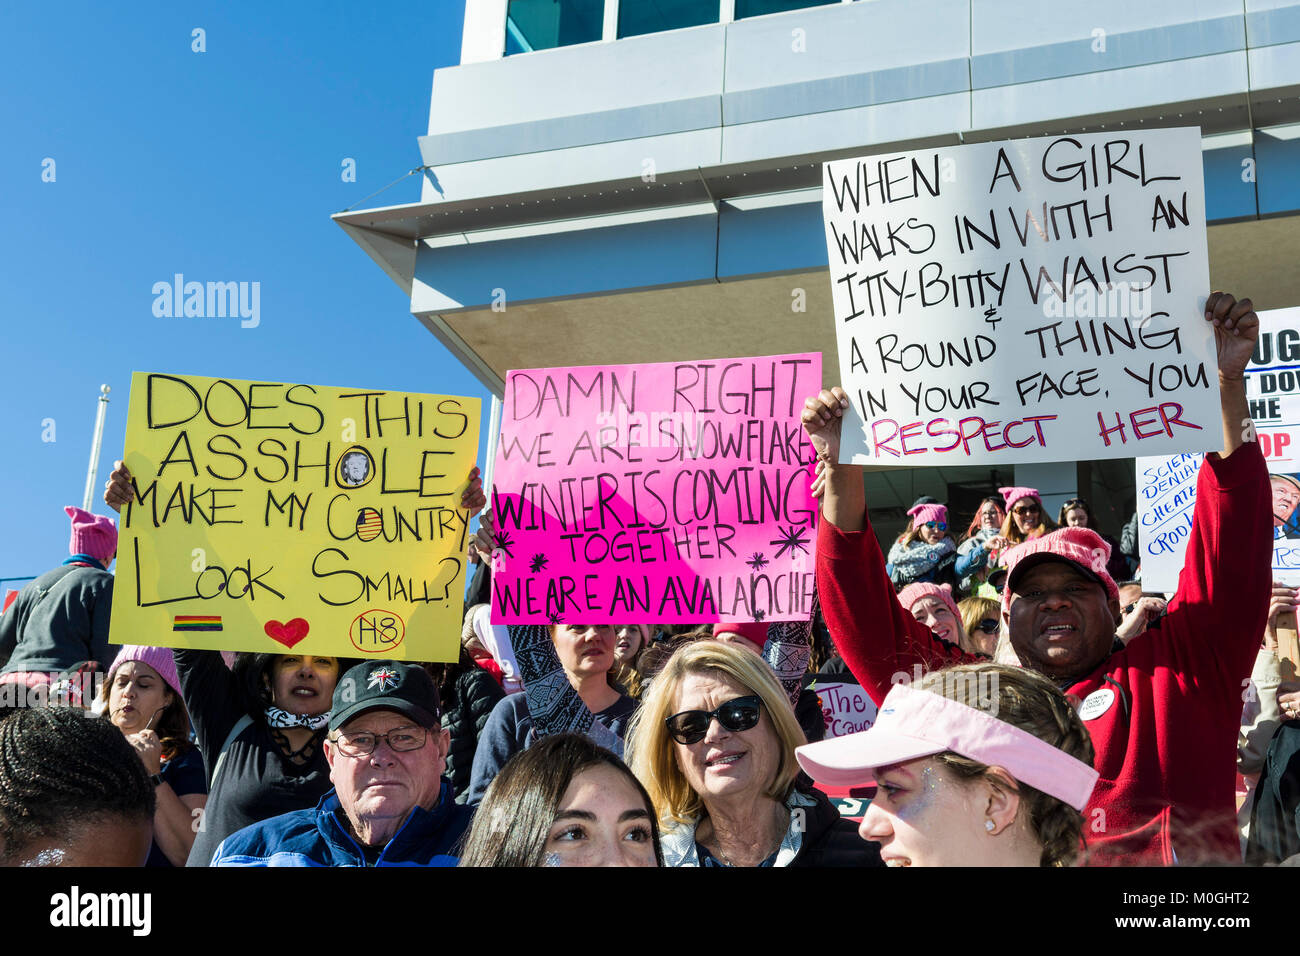 Las Vegas, NV, USA. 21st Jan, 2018. Atmosphere at the Women's March “Power to the Polls” rally in LAs Vegas, Nevada on January 21, 2018. Credit: Damairs Carter/Media Punch/Alamy Live News Stock Photo